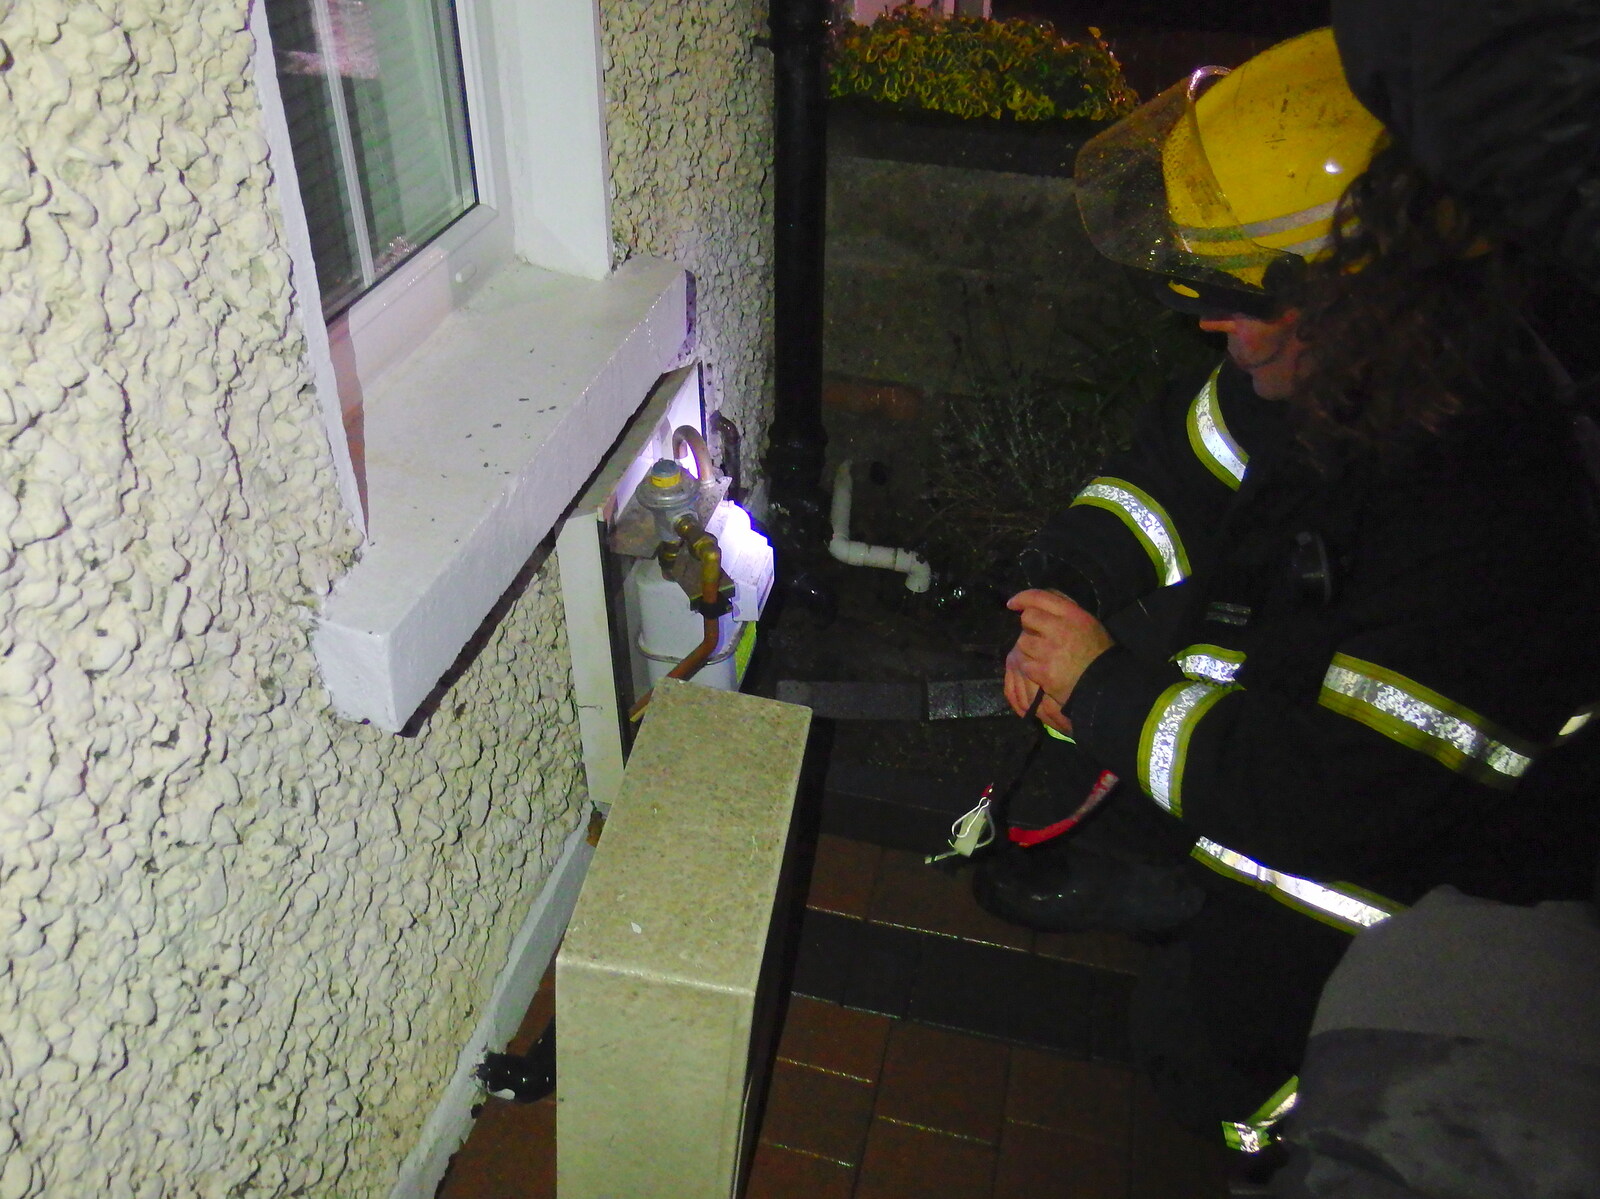 The gas meter is checked from Dun Laoghaire and an Electrical Disaster, Monkstown, County Dublin, Ireland - 4th January 2014